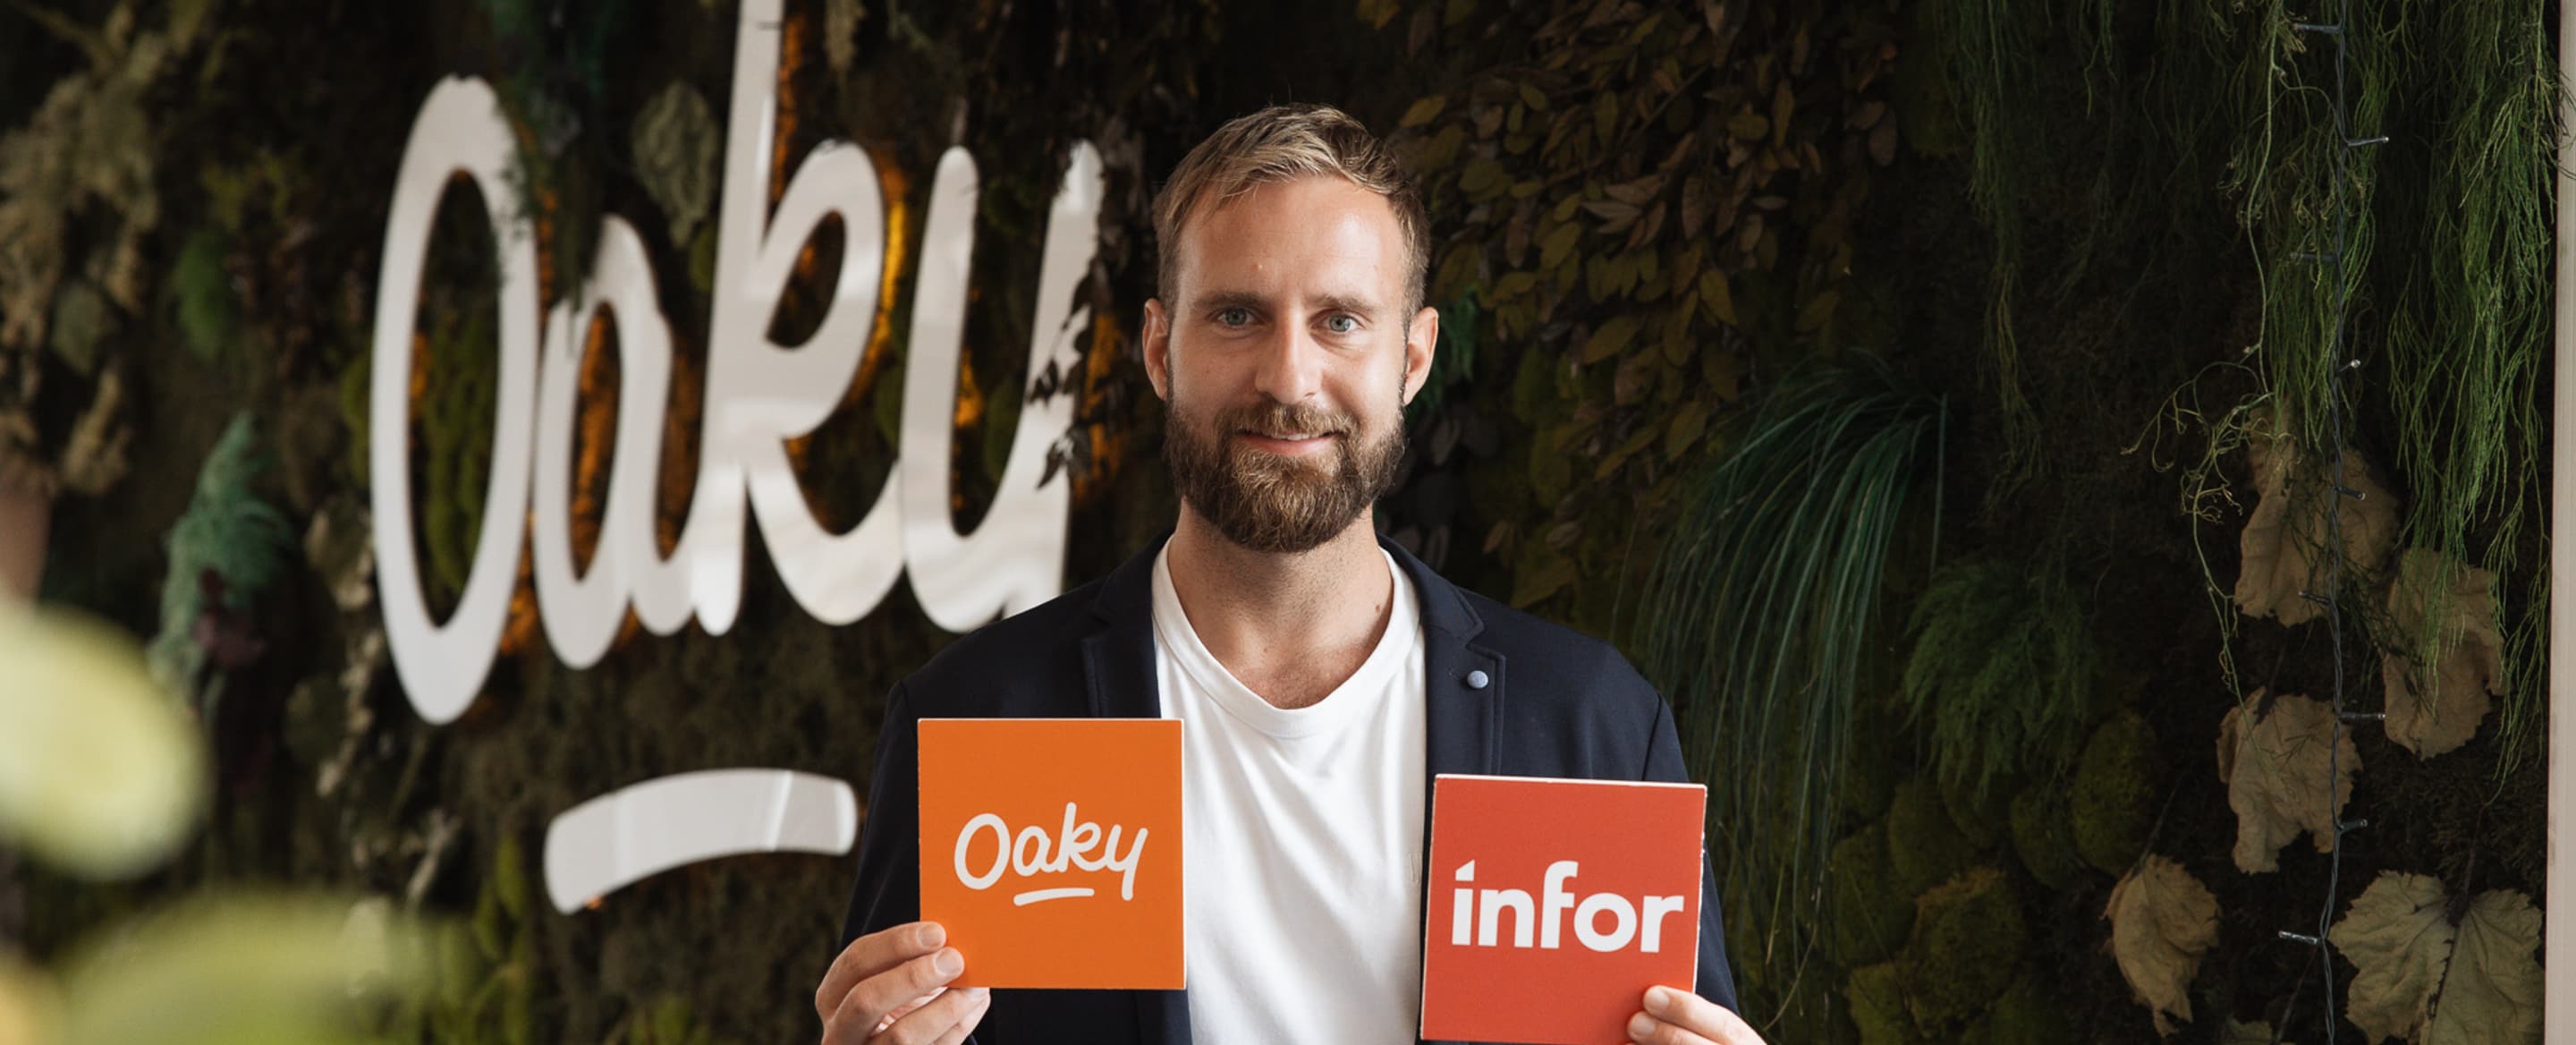 Infor and Oaky integration